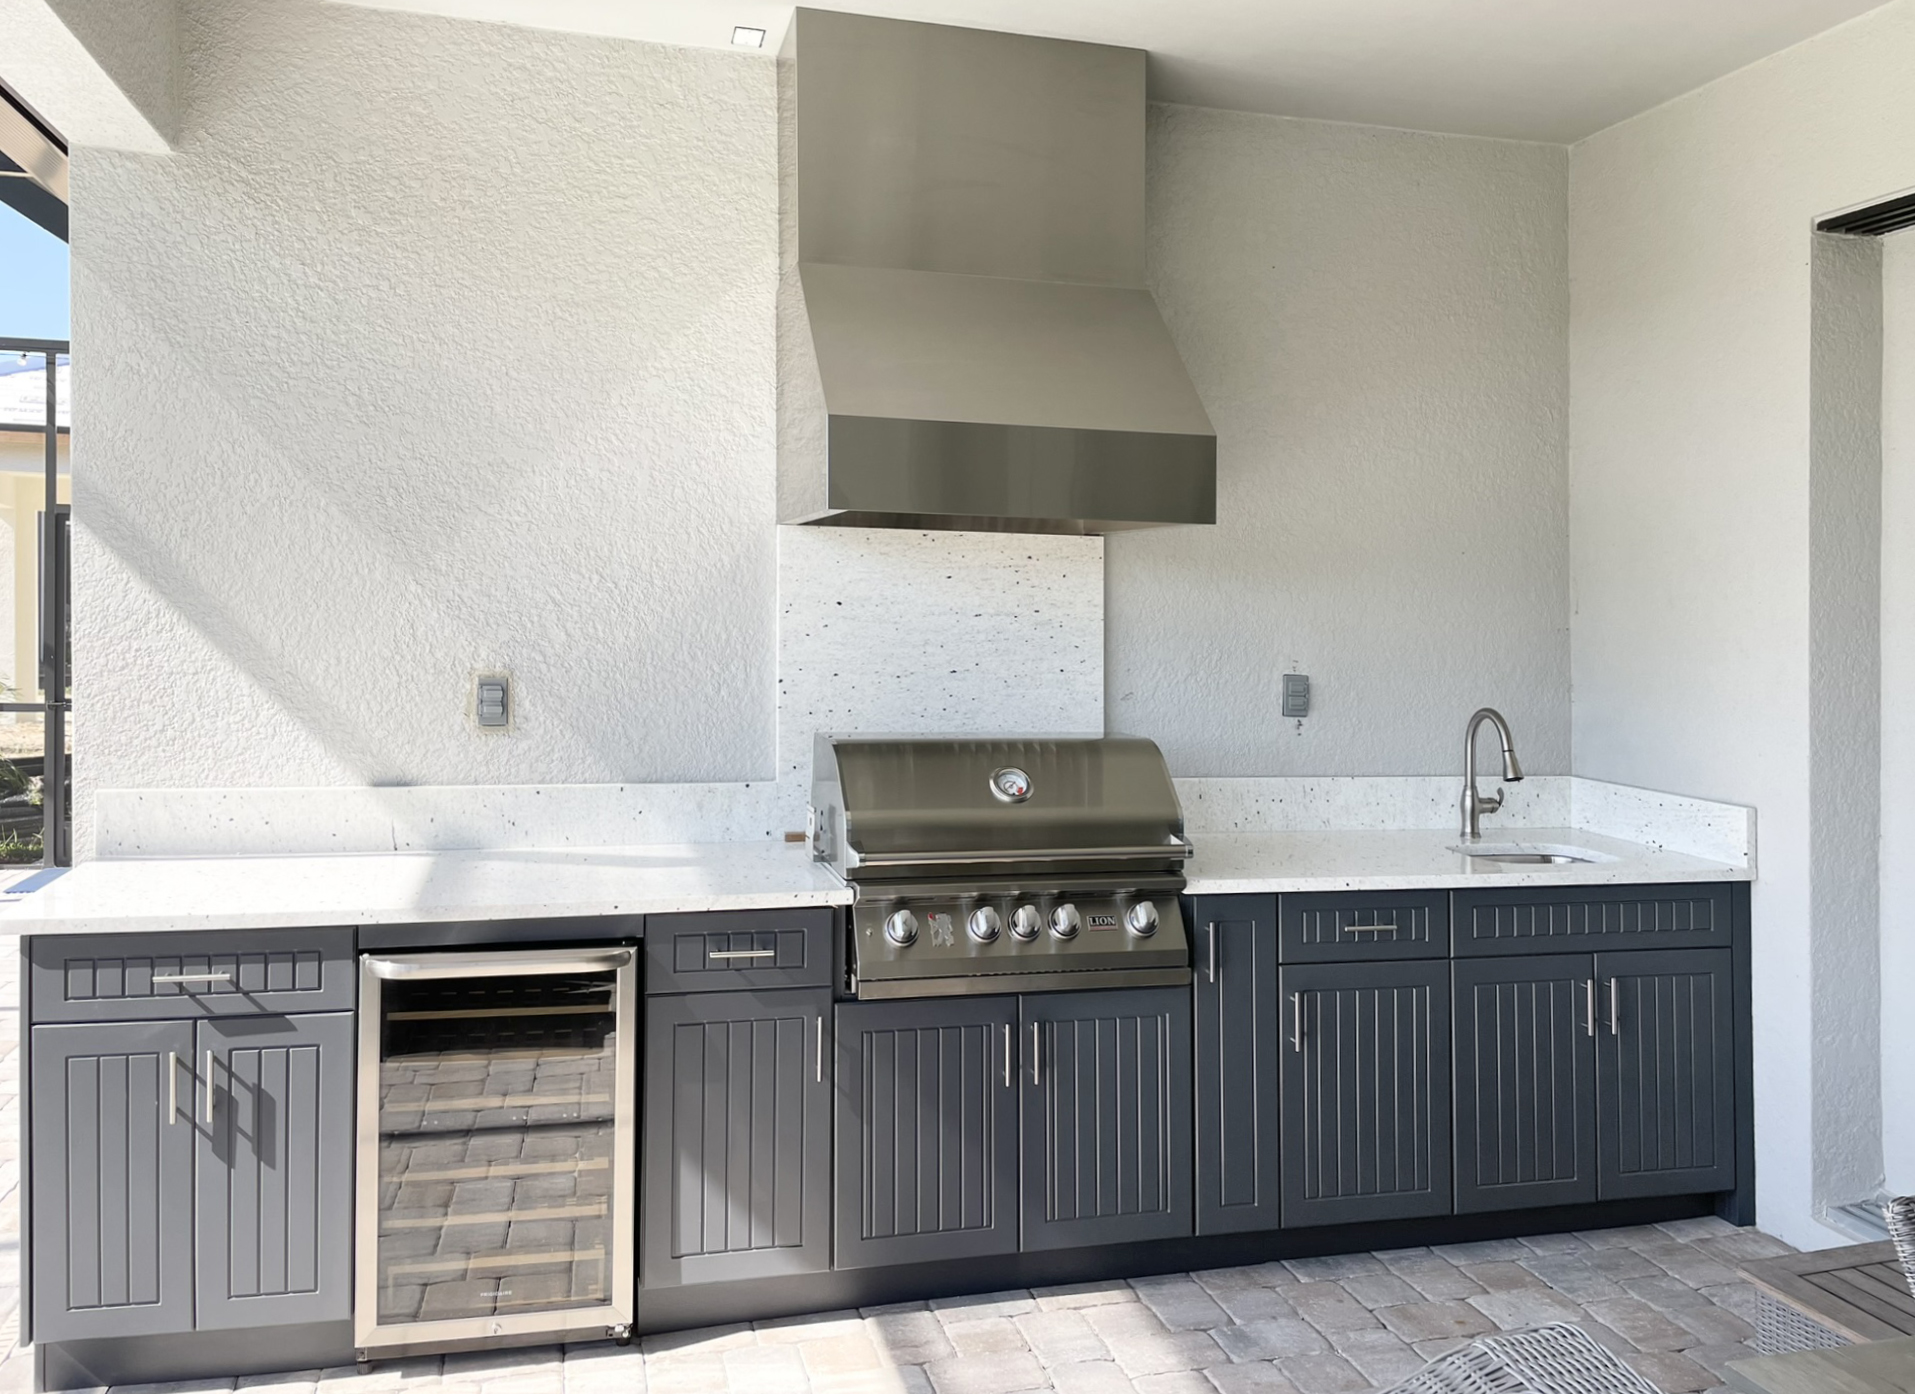 OUTDOOR KITCHEN 25. Custom outdoor kitchen in Lakewood Ranch, FL. Kitchen features charcoal grey, v-groove style cabinets. Appliances include Lion grill, Tradewind outdoor hood, stainless hood chase, Azure glass front refrigerator and stainless bar pulls.